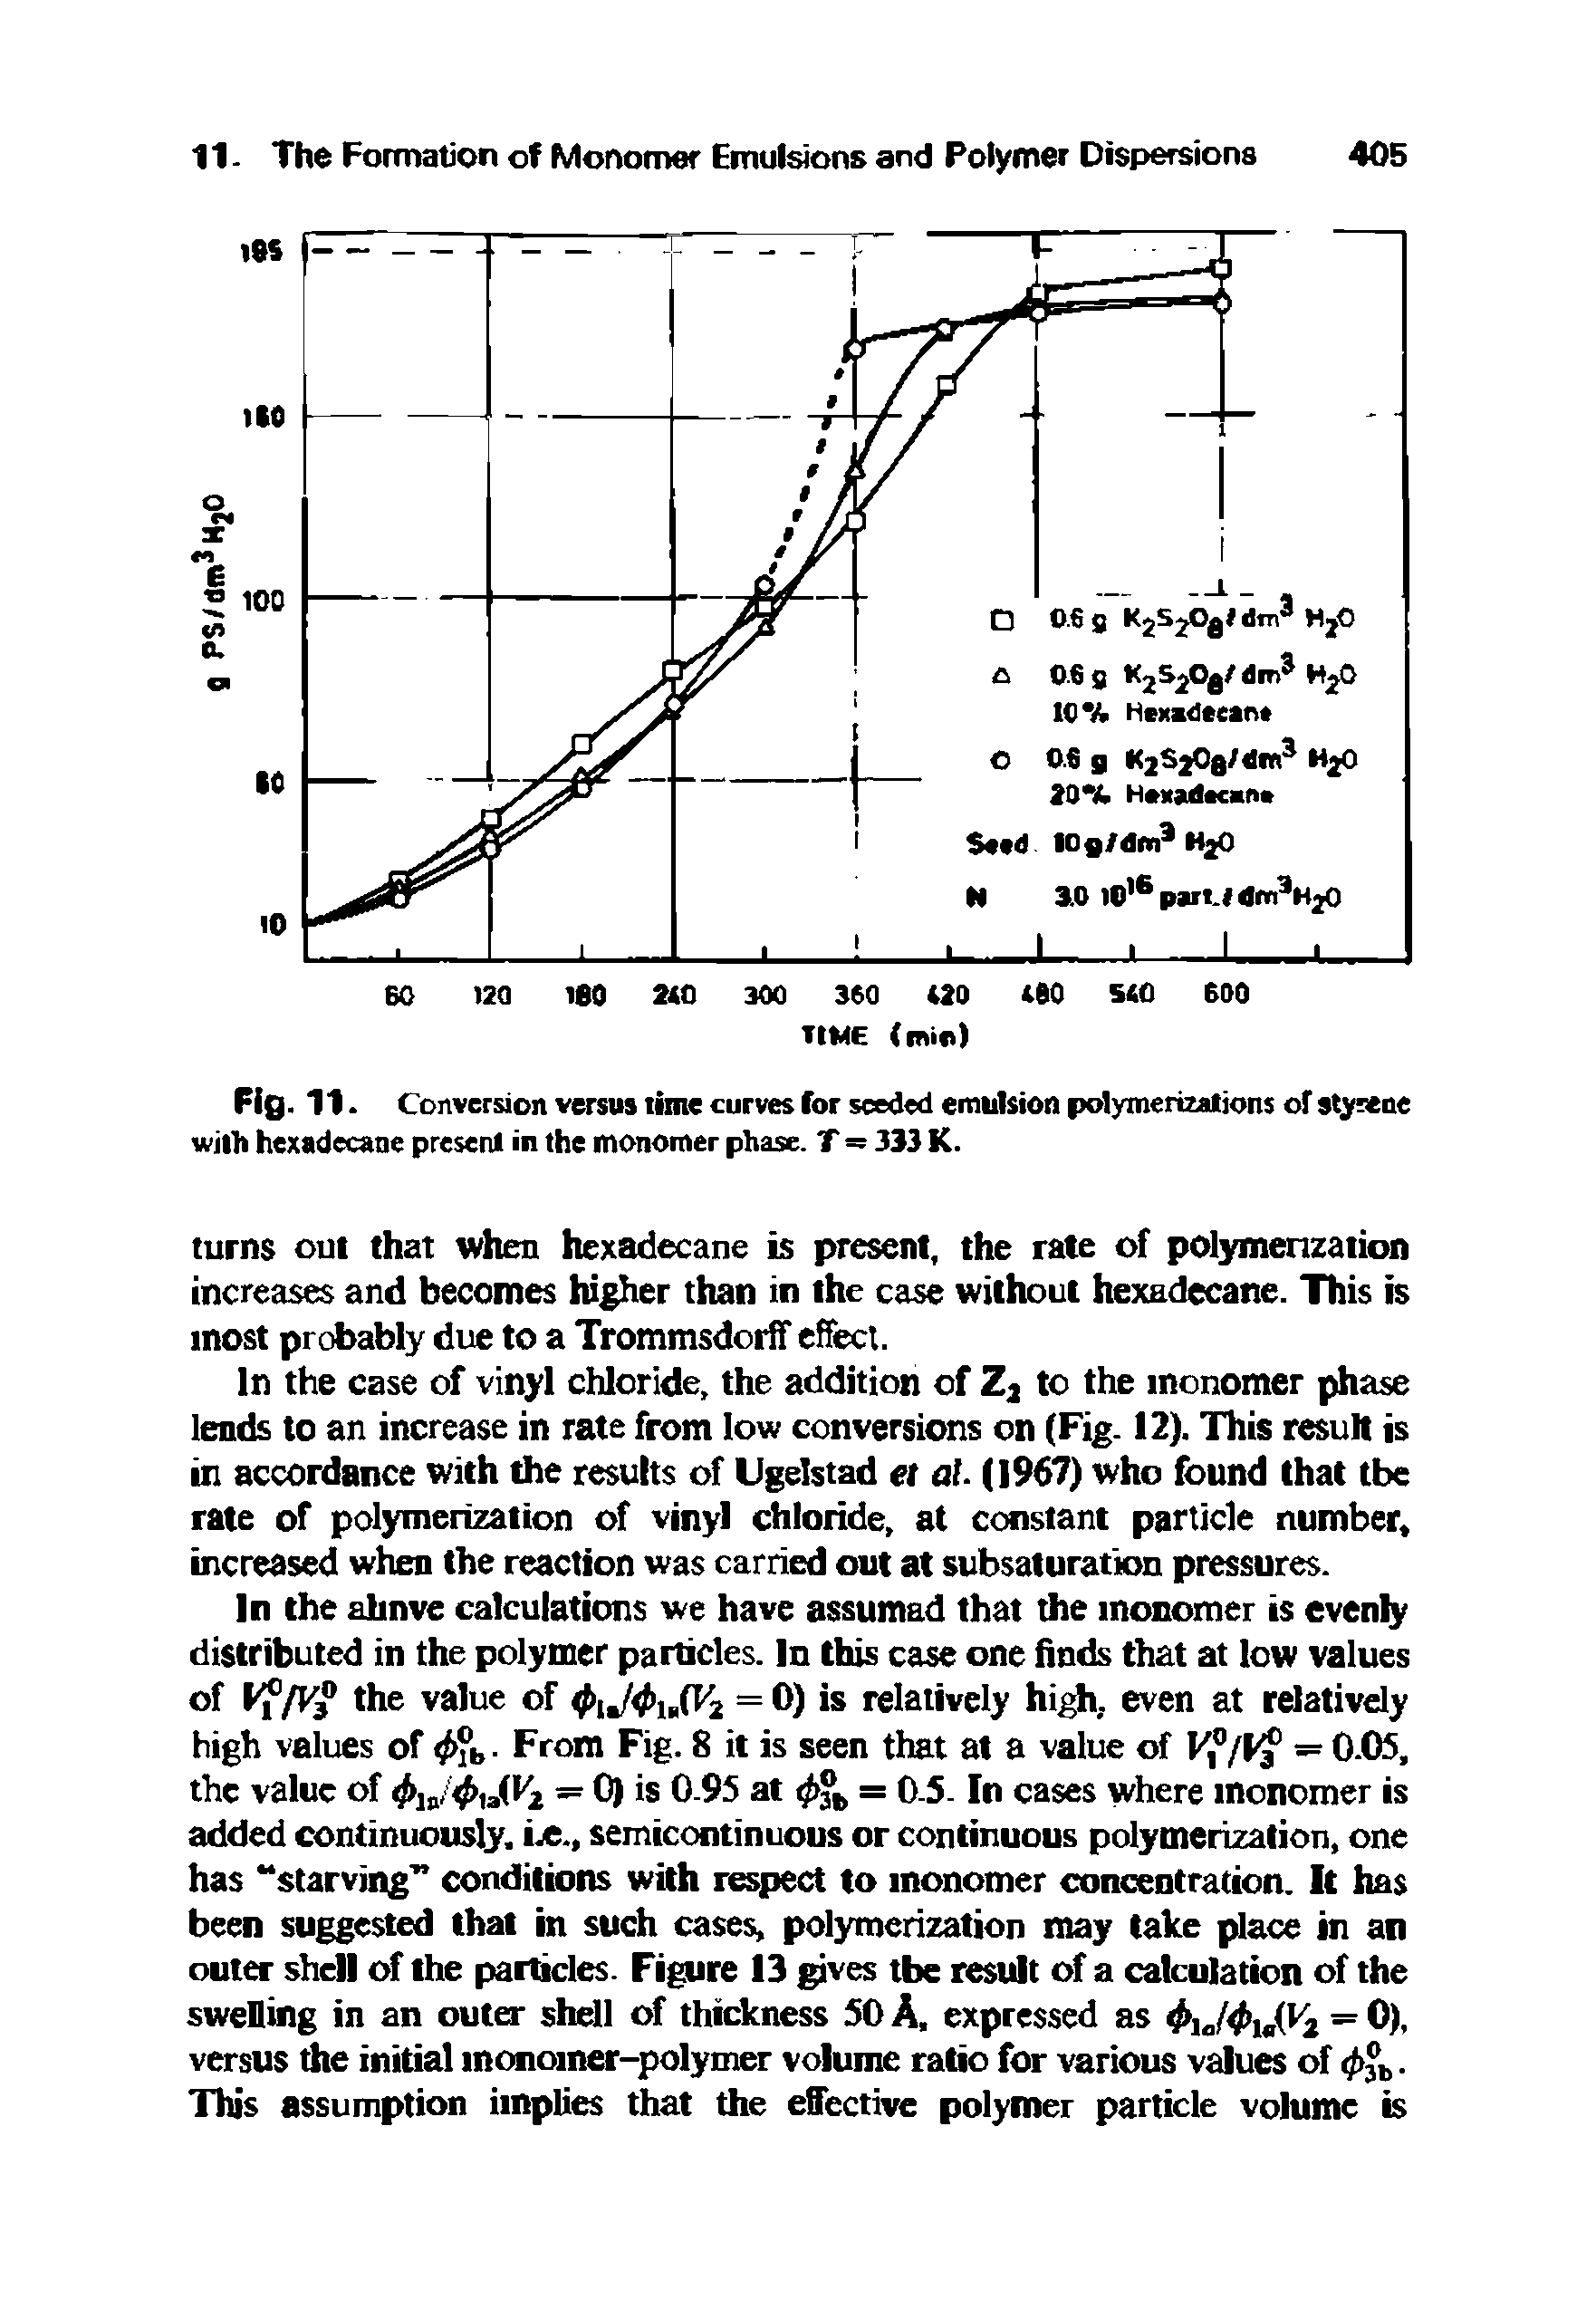 Fig. 11. Conversion versus time curves for seeded emulsion polymerizations of styrene with hexadecane present in the monomer phase. T — 333 K.